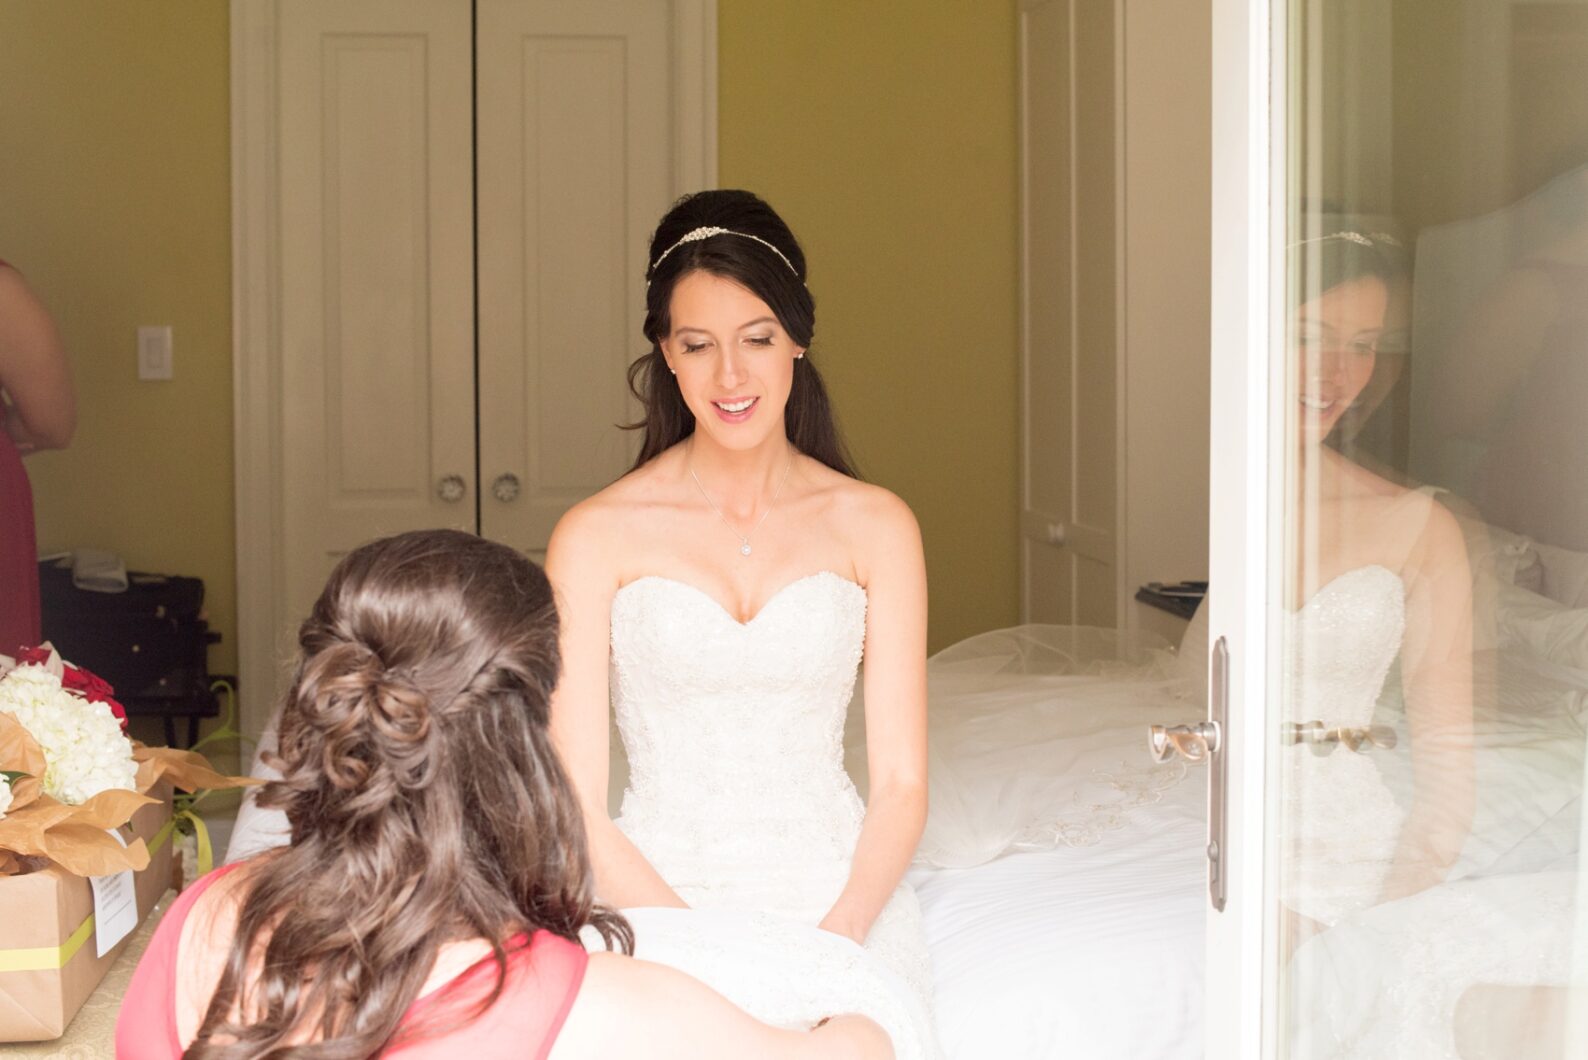 Omni Bedford Springs Resort wedding photos by Mikkel Paige Photography. The bride gets ready in her strapless wedding gown.